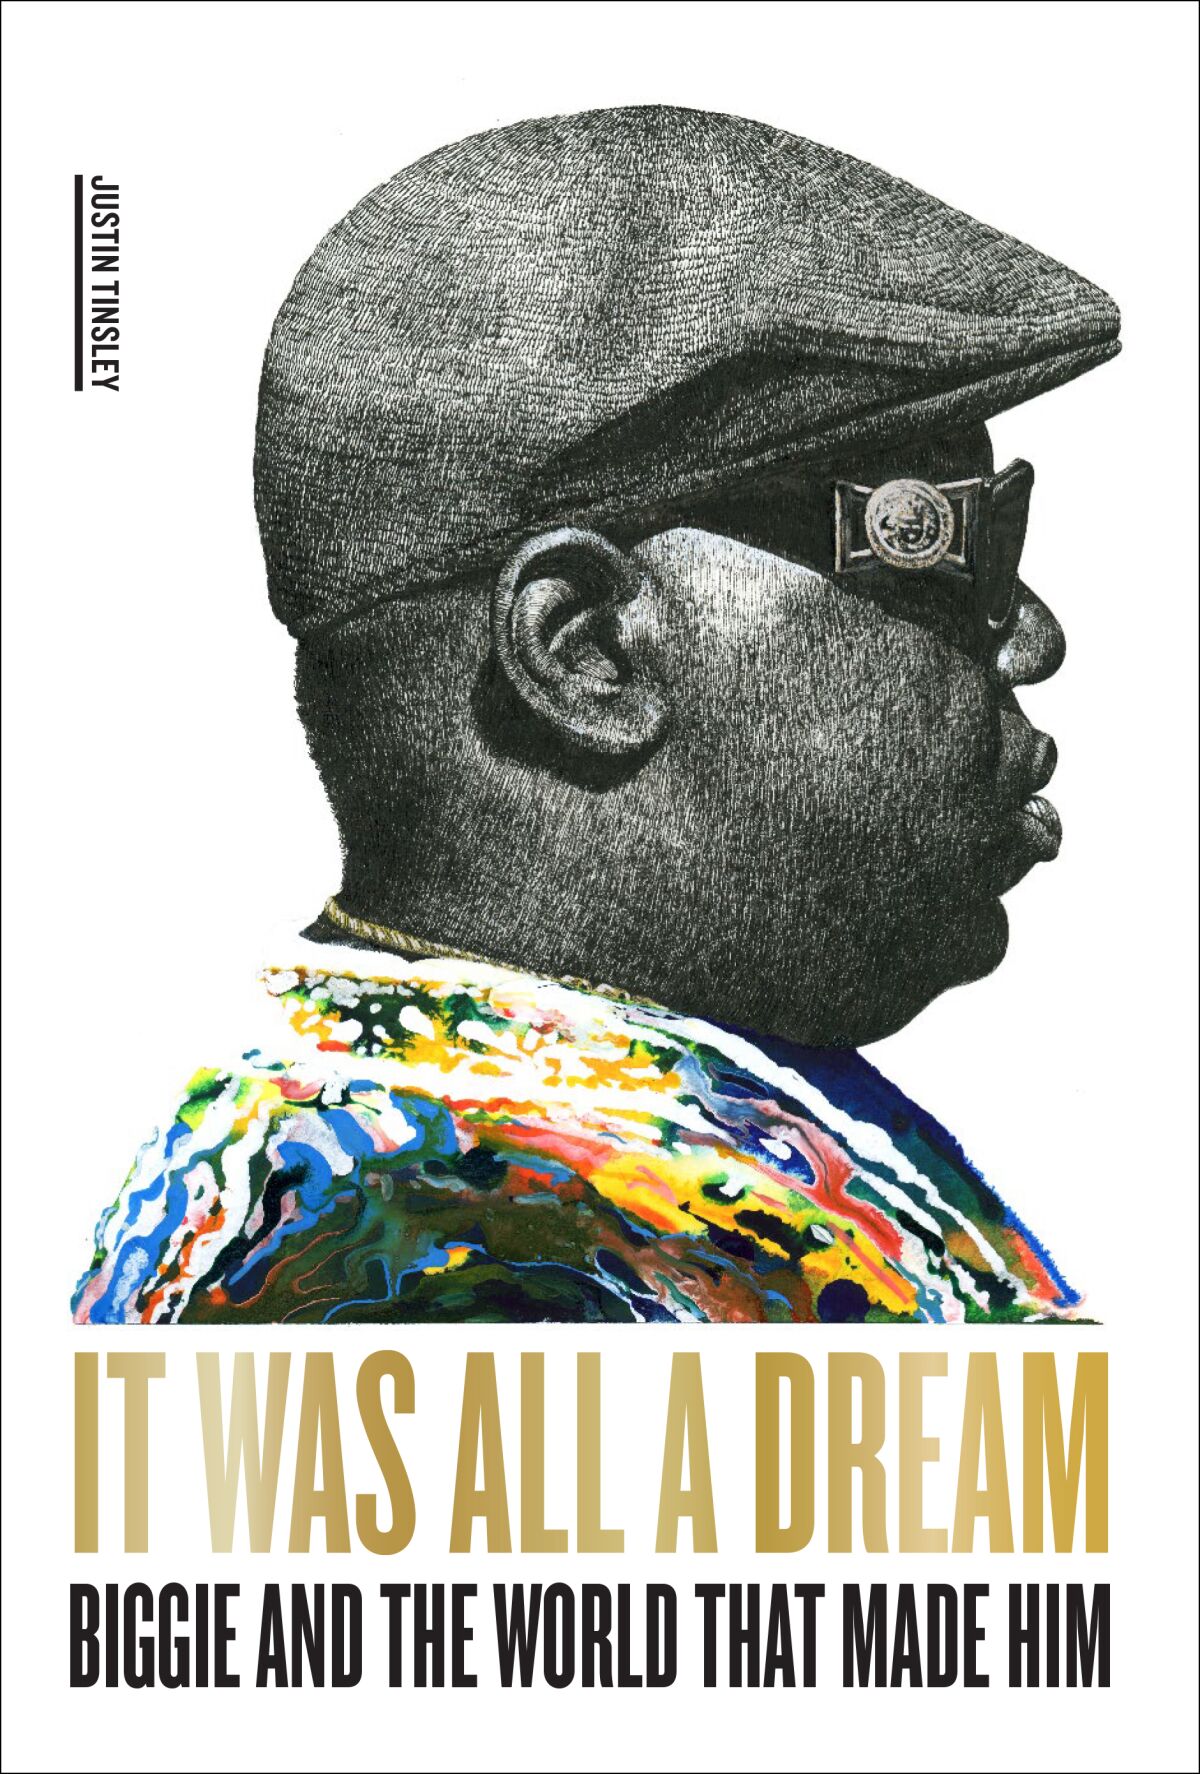 "It Was All a Dream: Biggie and the World That Made Him" by Justin Tinsley